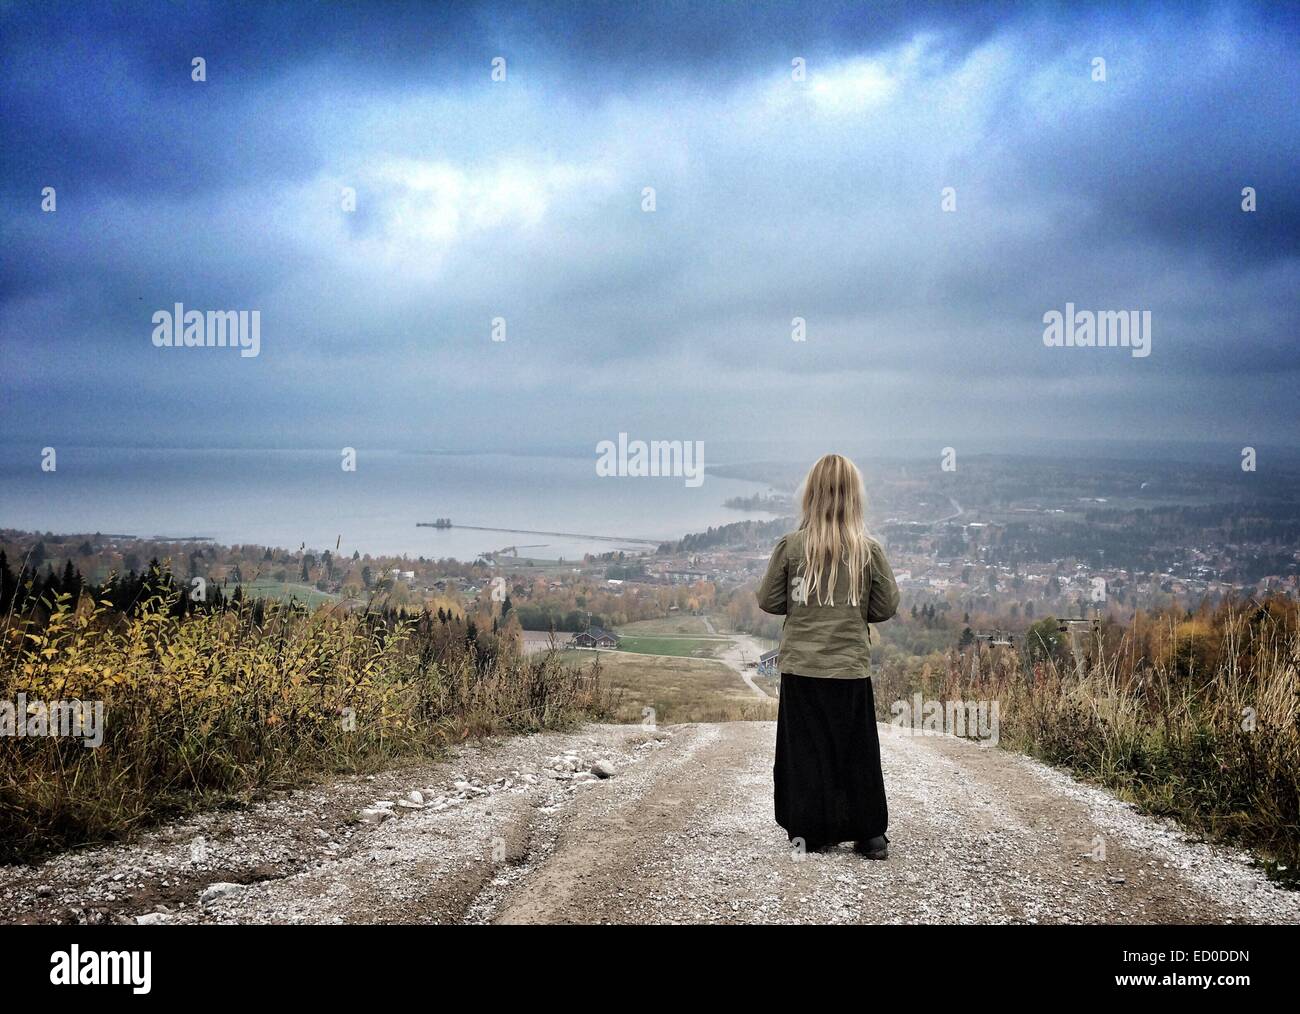 Girl standing on a hill looking at cityscape, Dalarna, Sweden Stock Photo -  Alamy